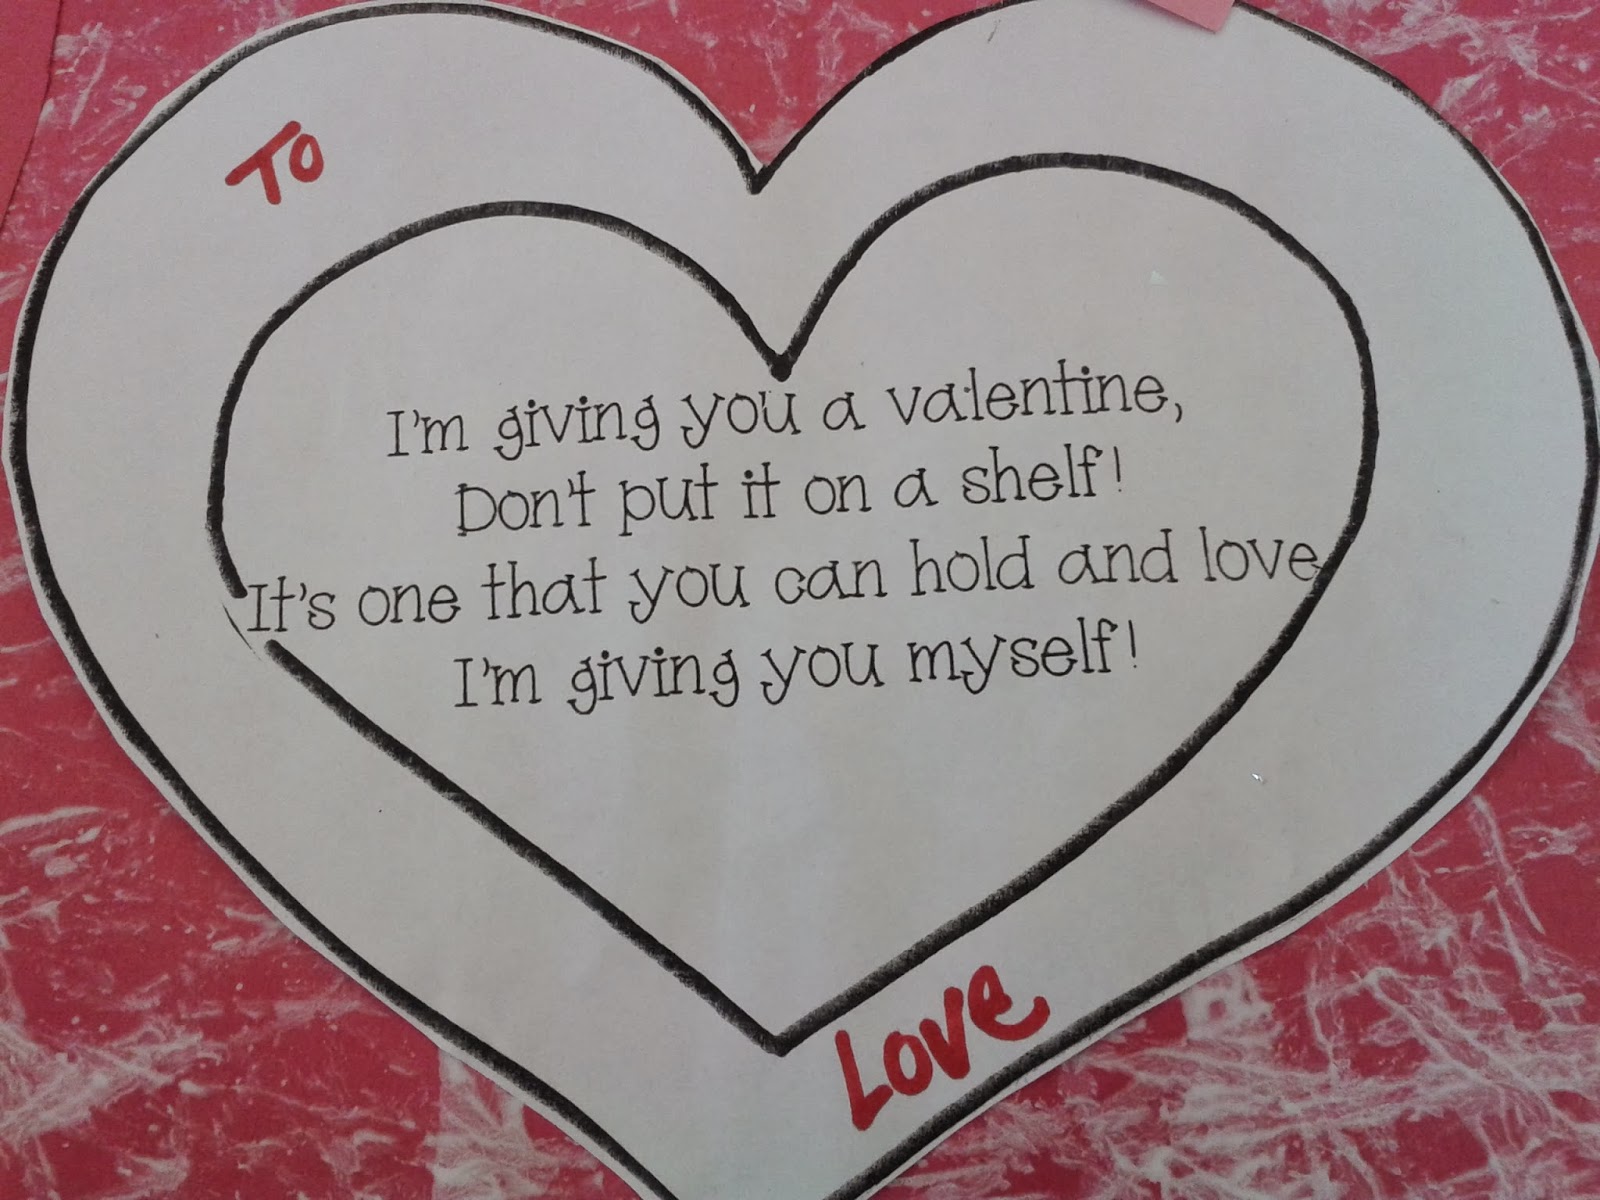 Teach Easy Resources: Show the Love! Valentine's Day Cards for Parents